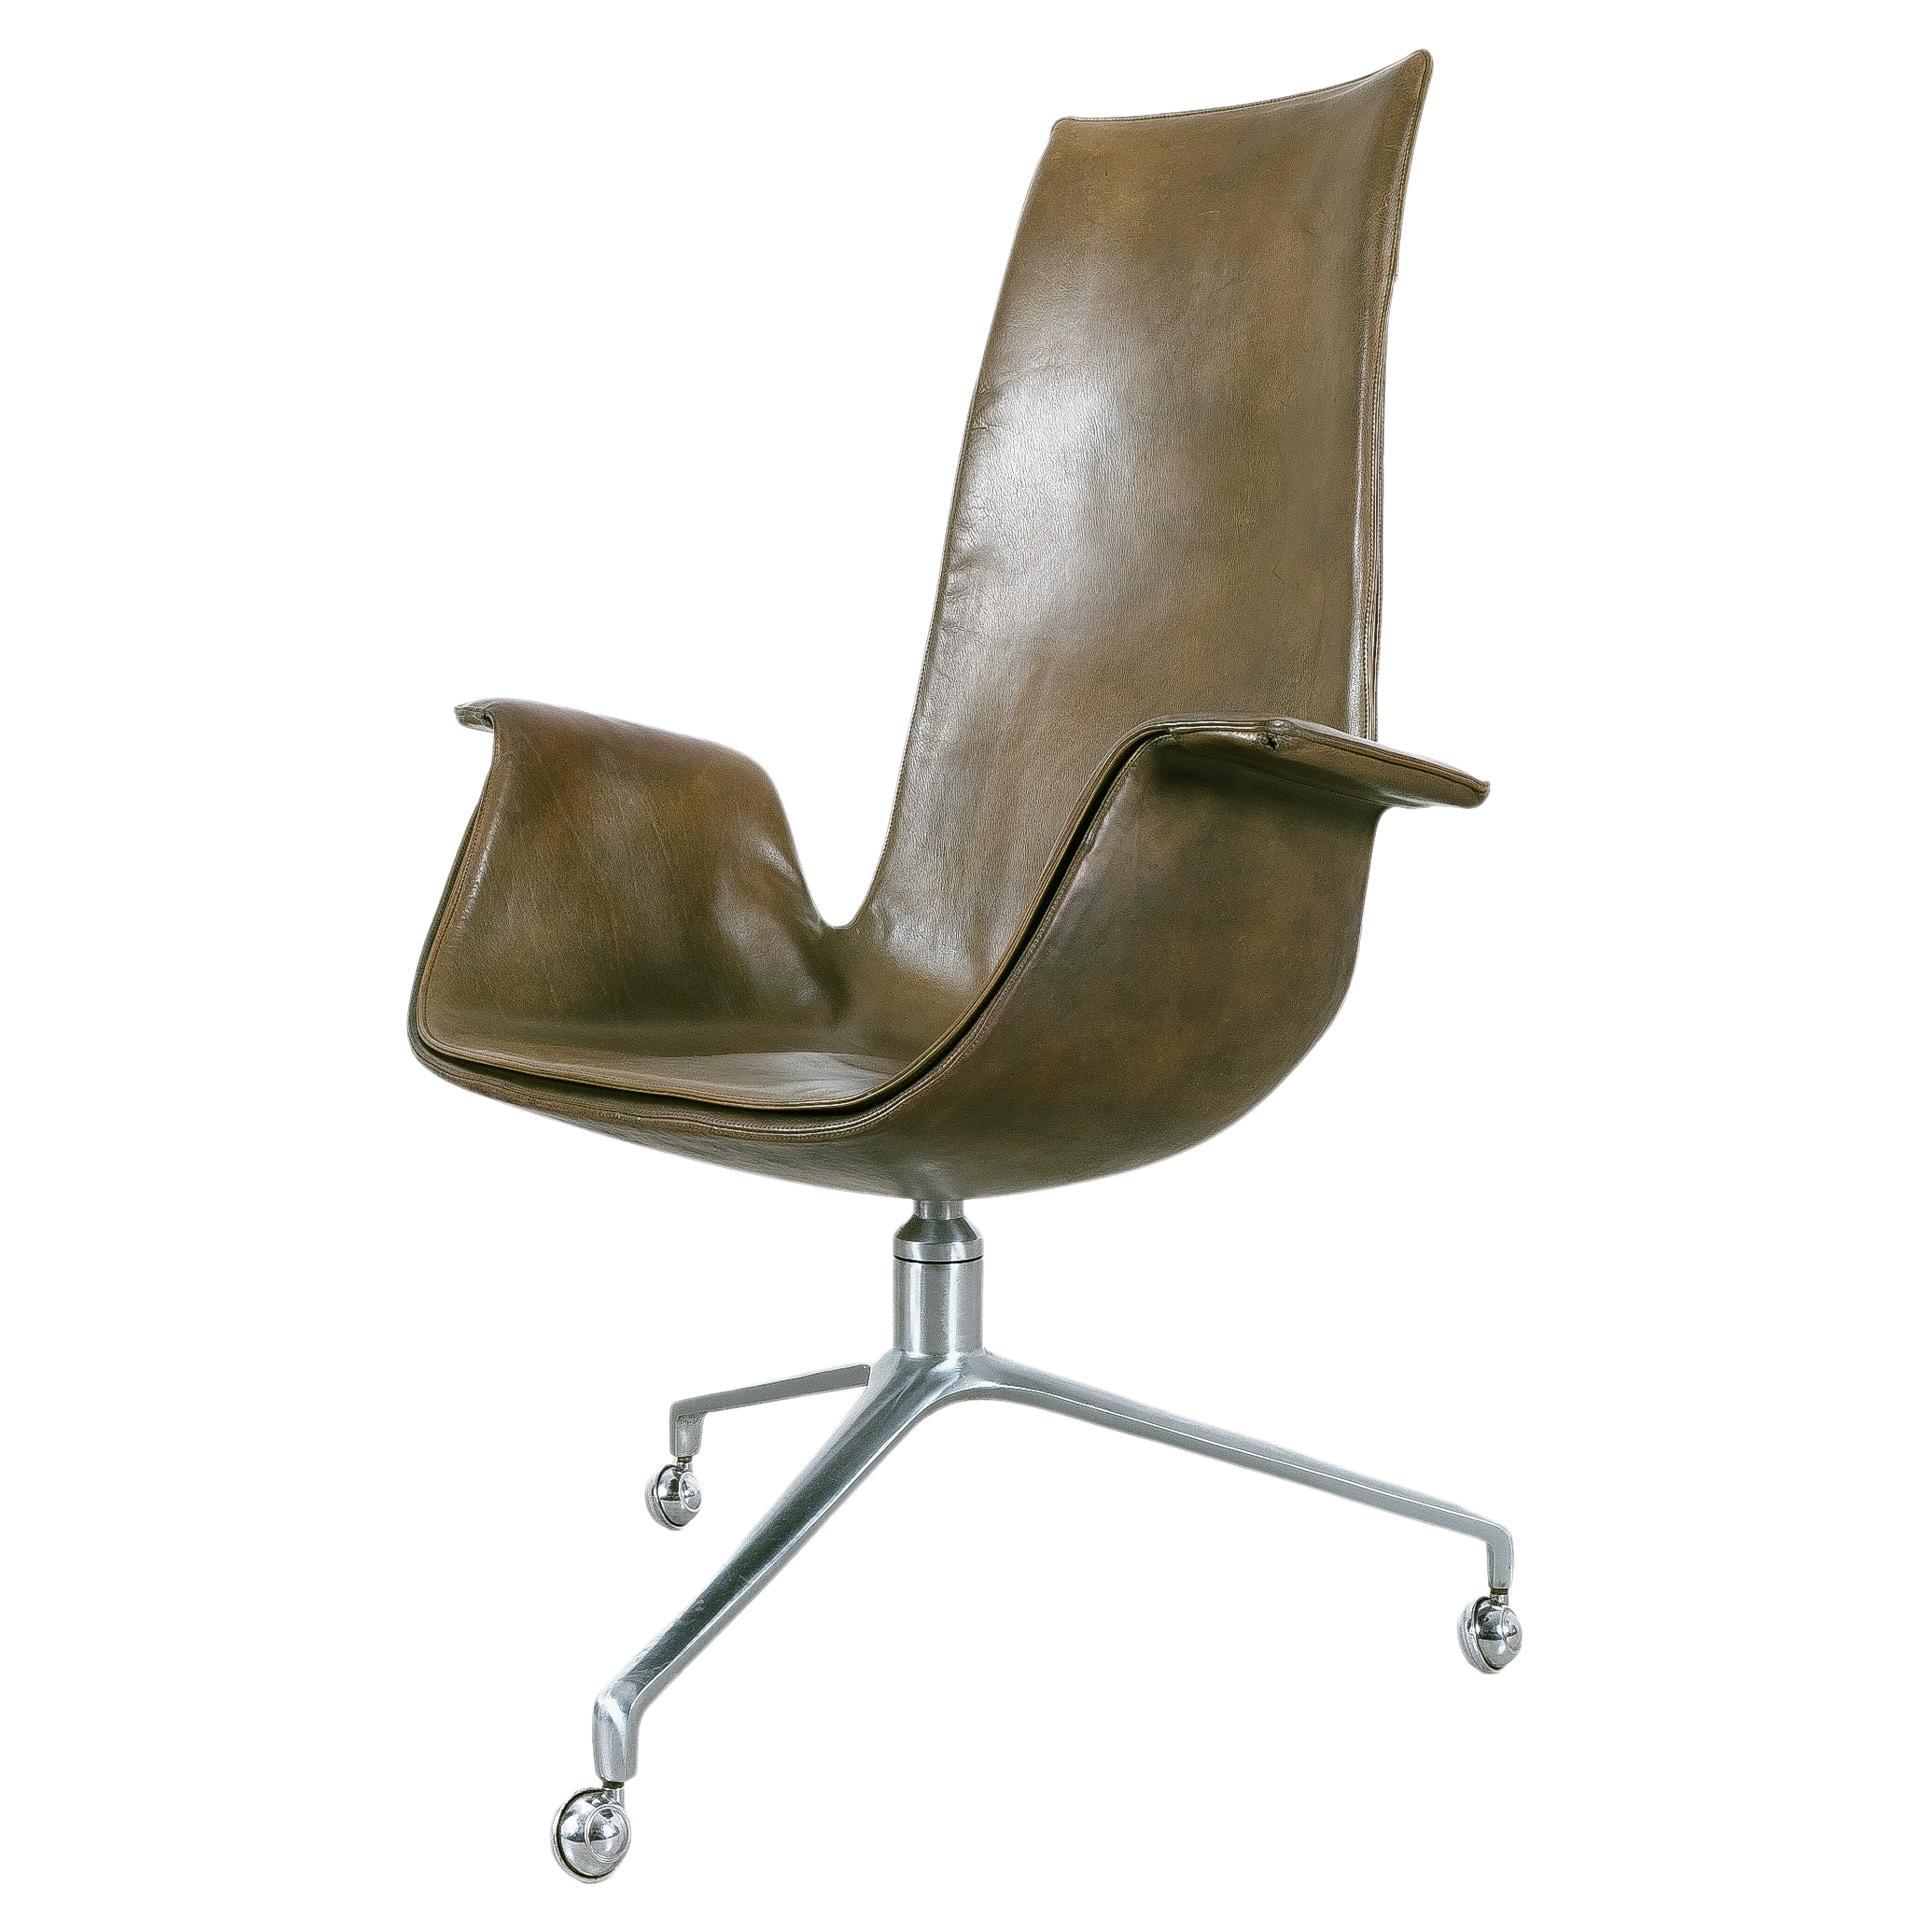 FK 6725 Fabricius and Kastholm Moss Green High Back Bird Desk Chair, 1964